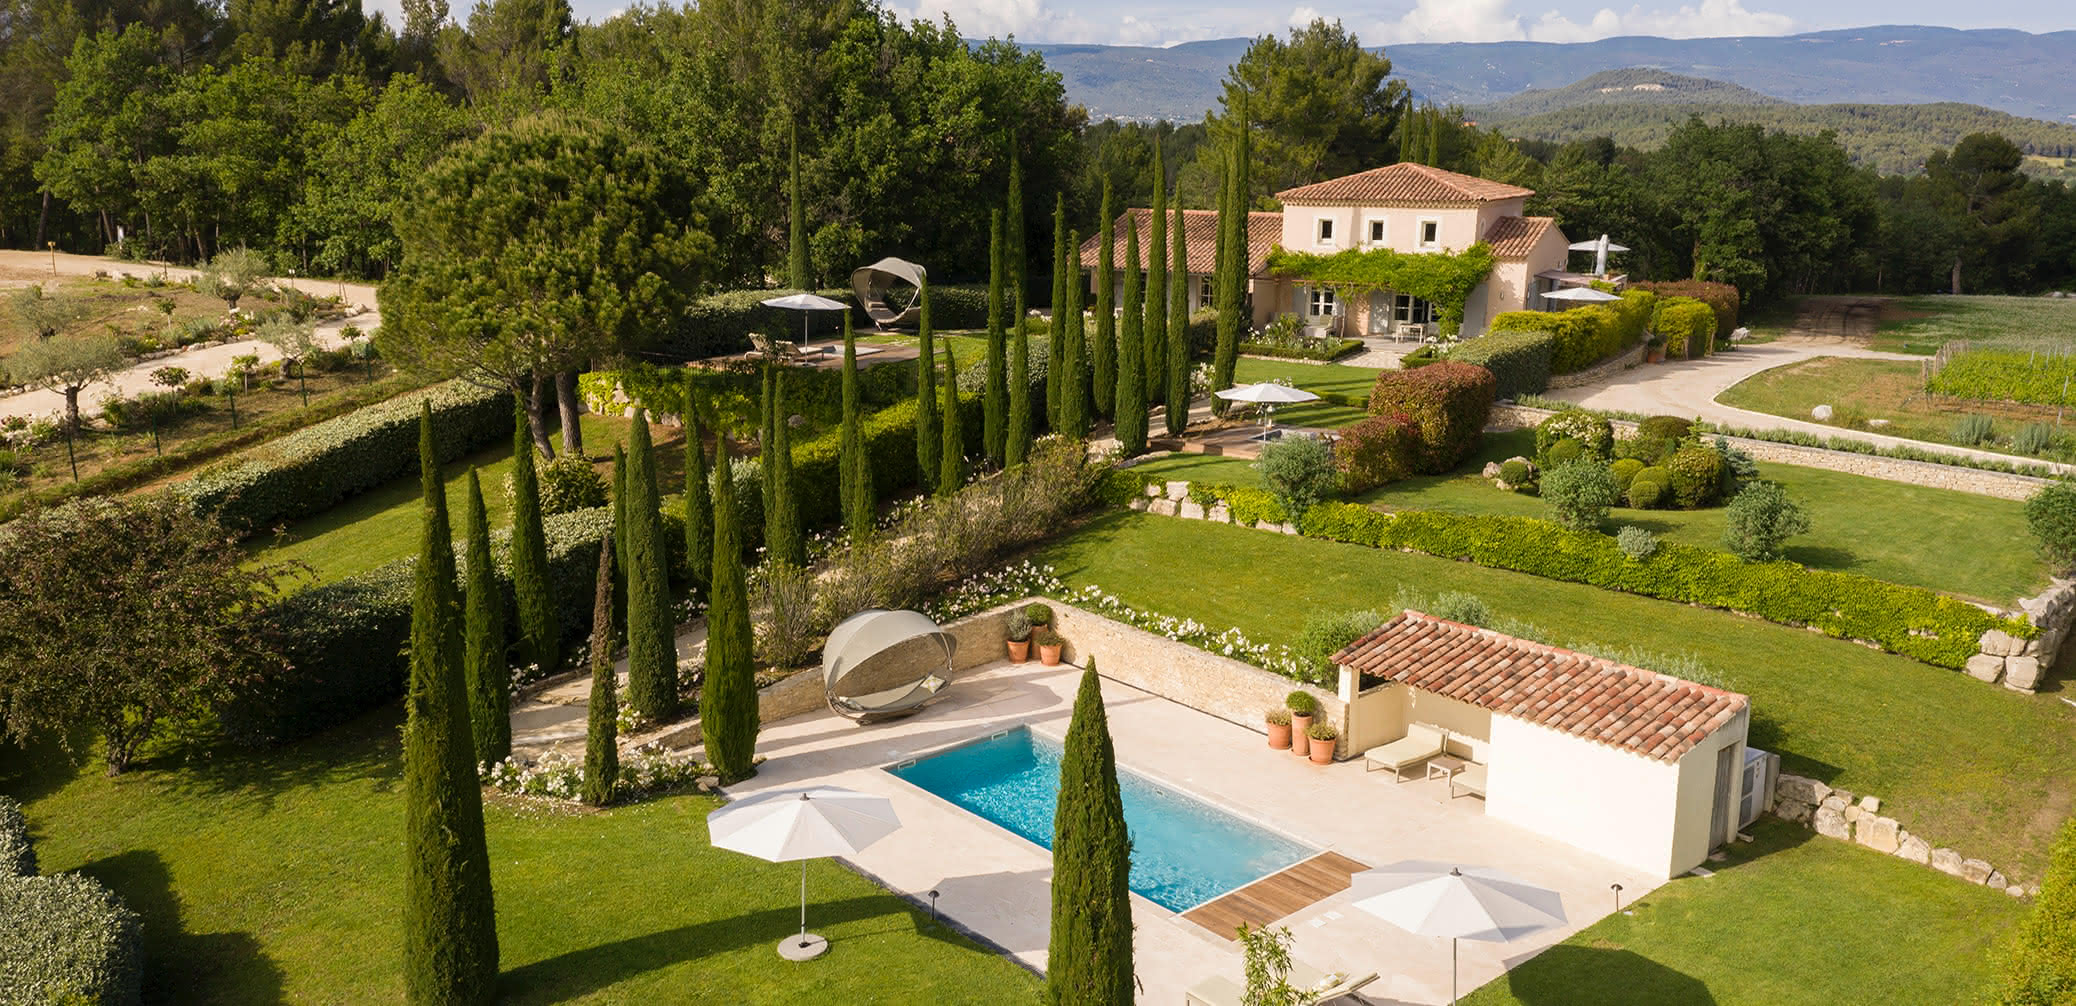 Bid On 2 Nights In A Five Star Luxury Spa Hotel in Gargas, Provence, France